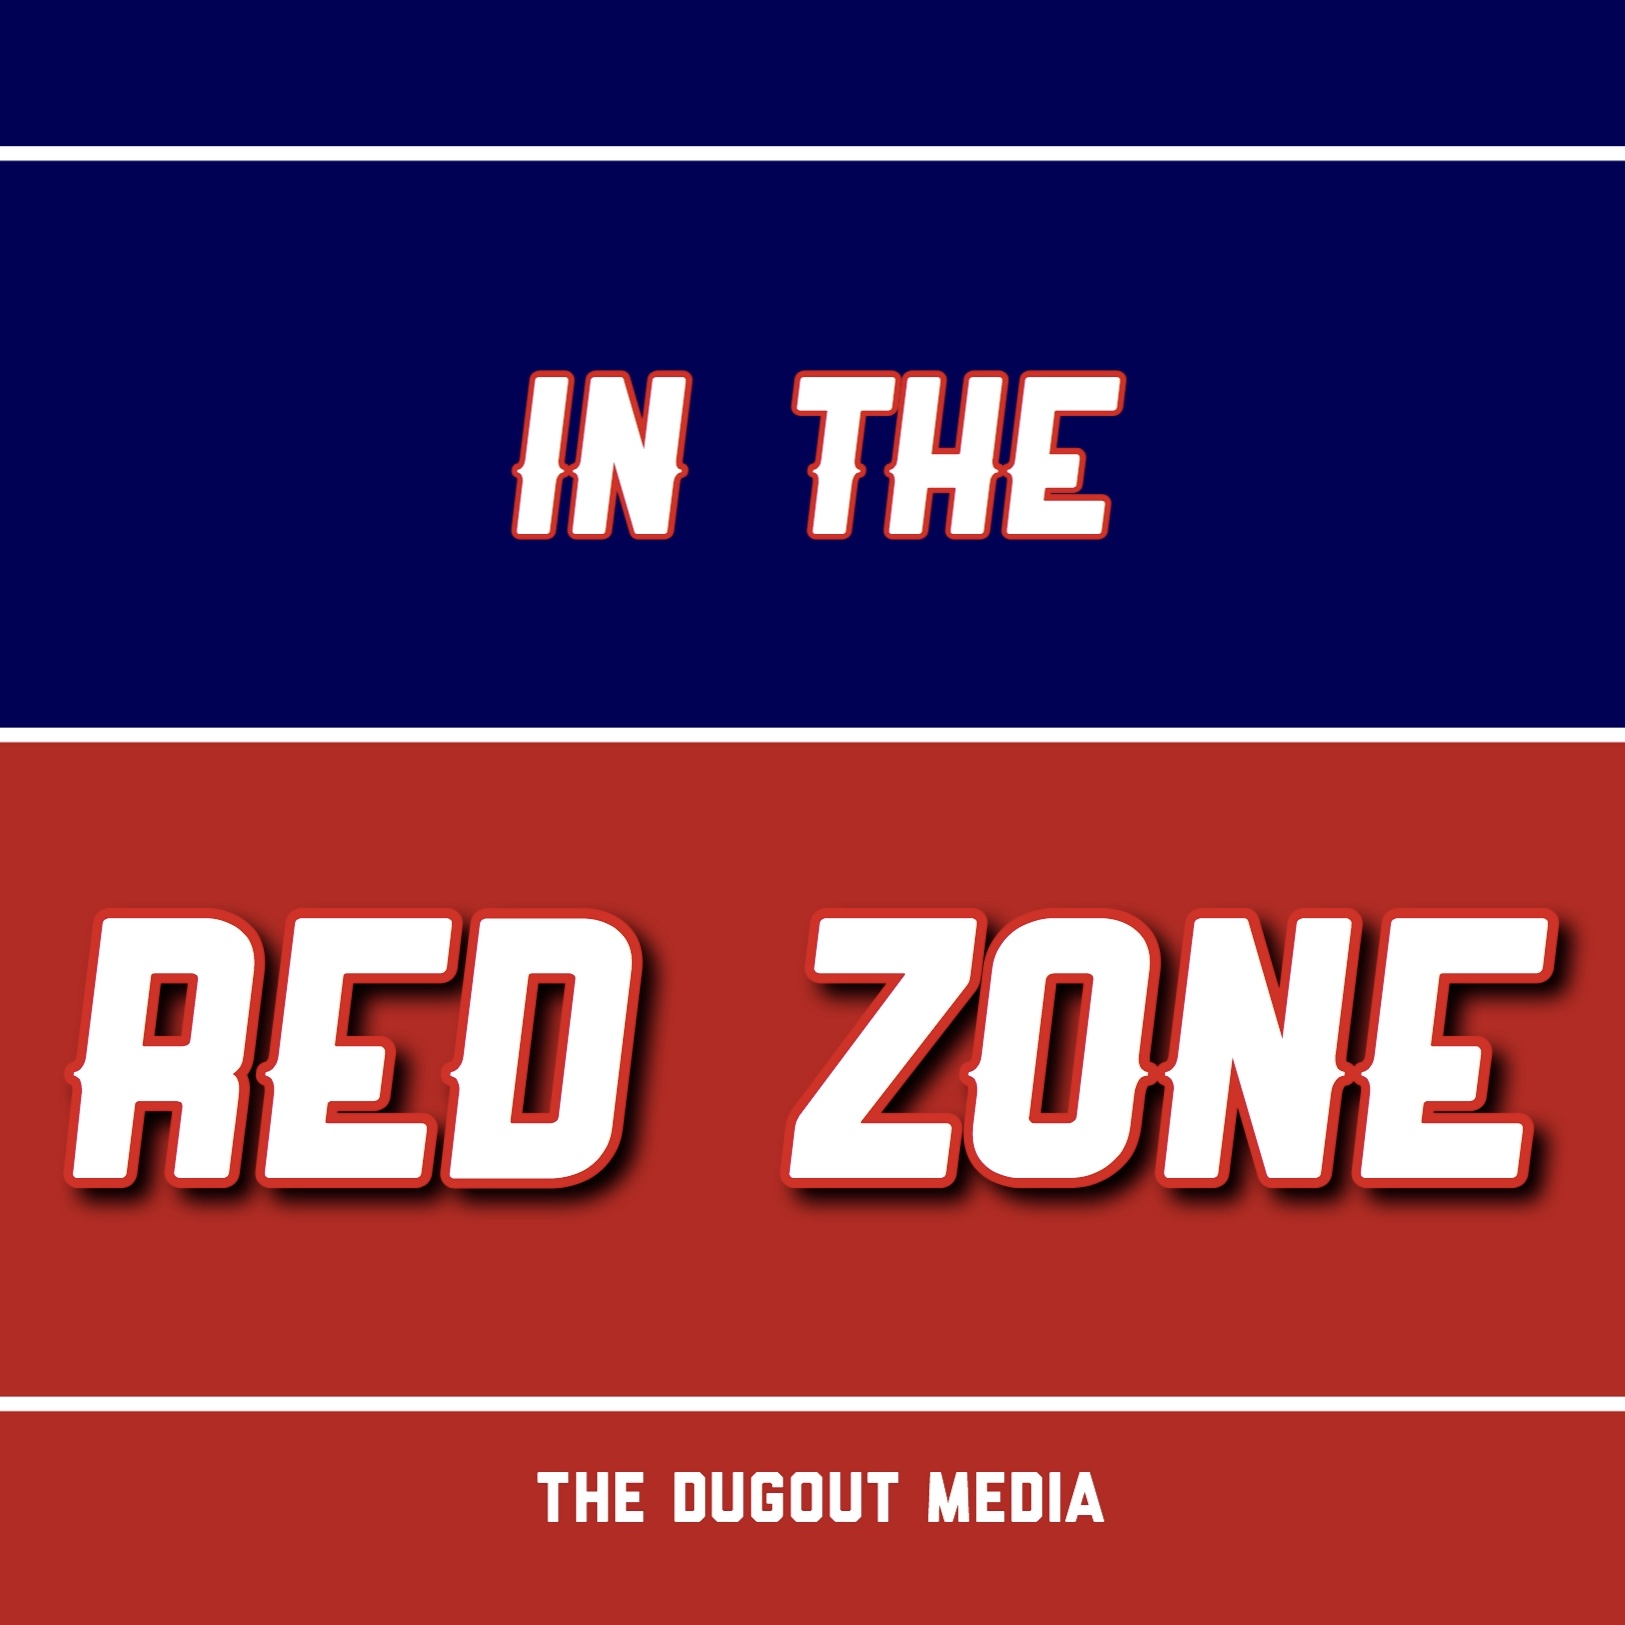 In The Red Zone